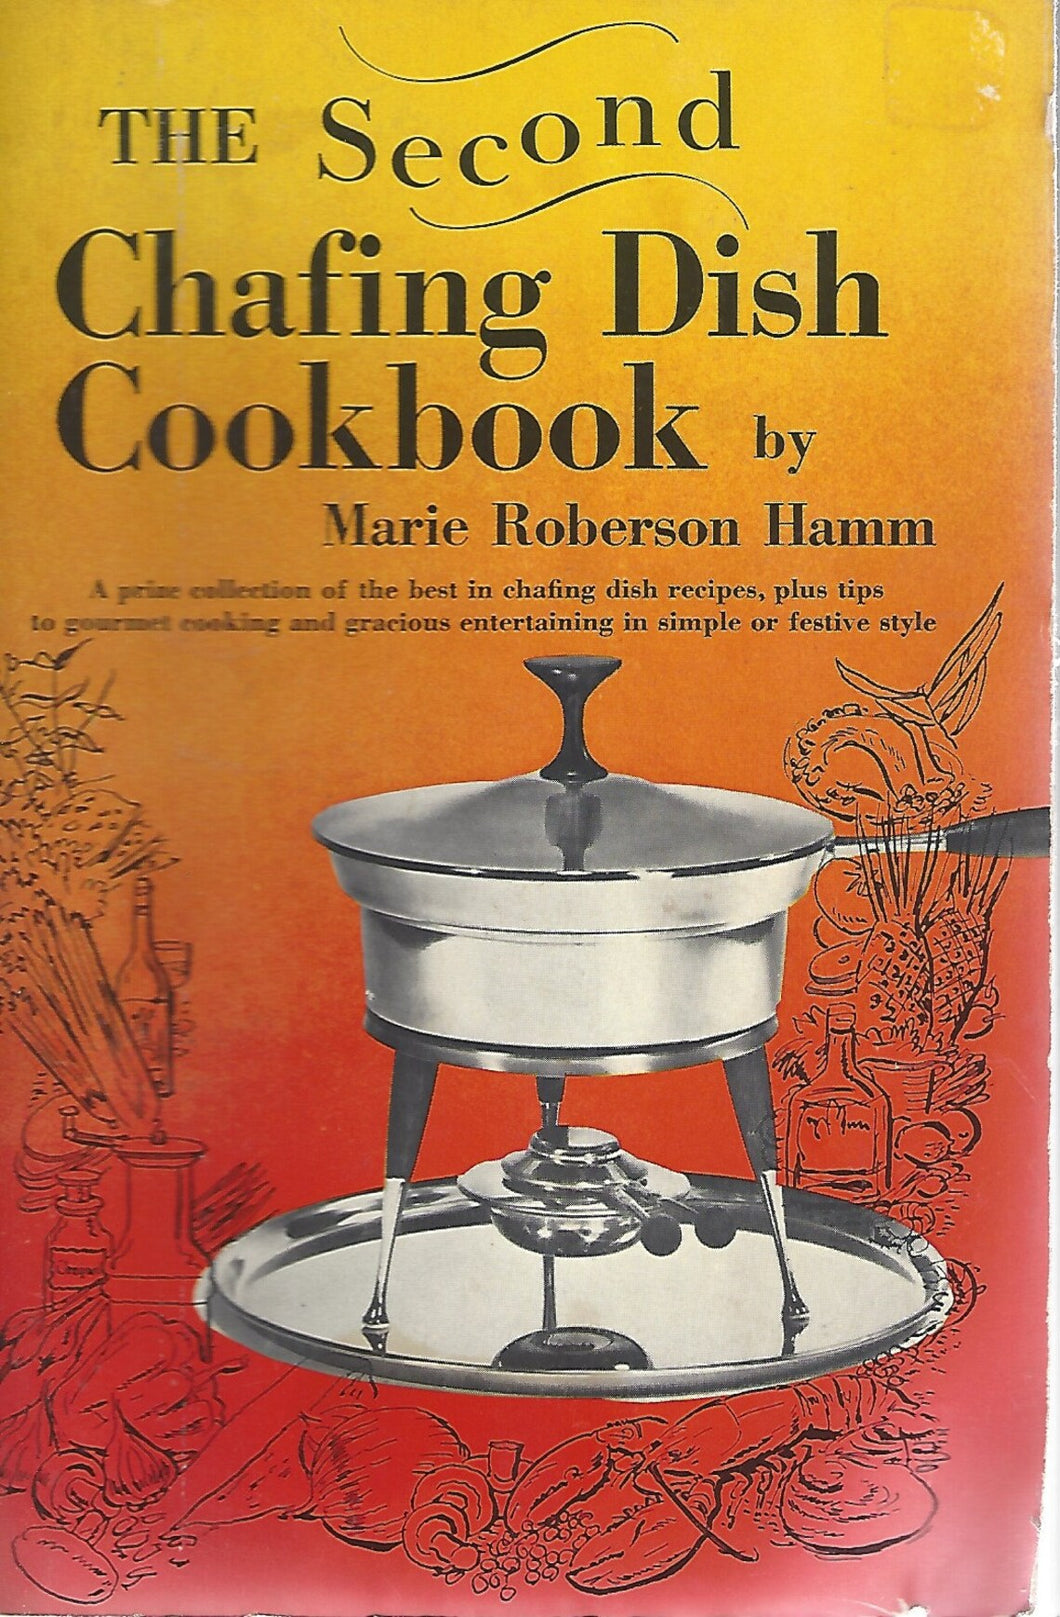 The Second Chafing Dish Cookbook by Marie Roberson Hamm